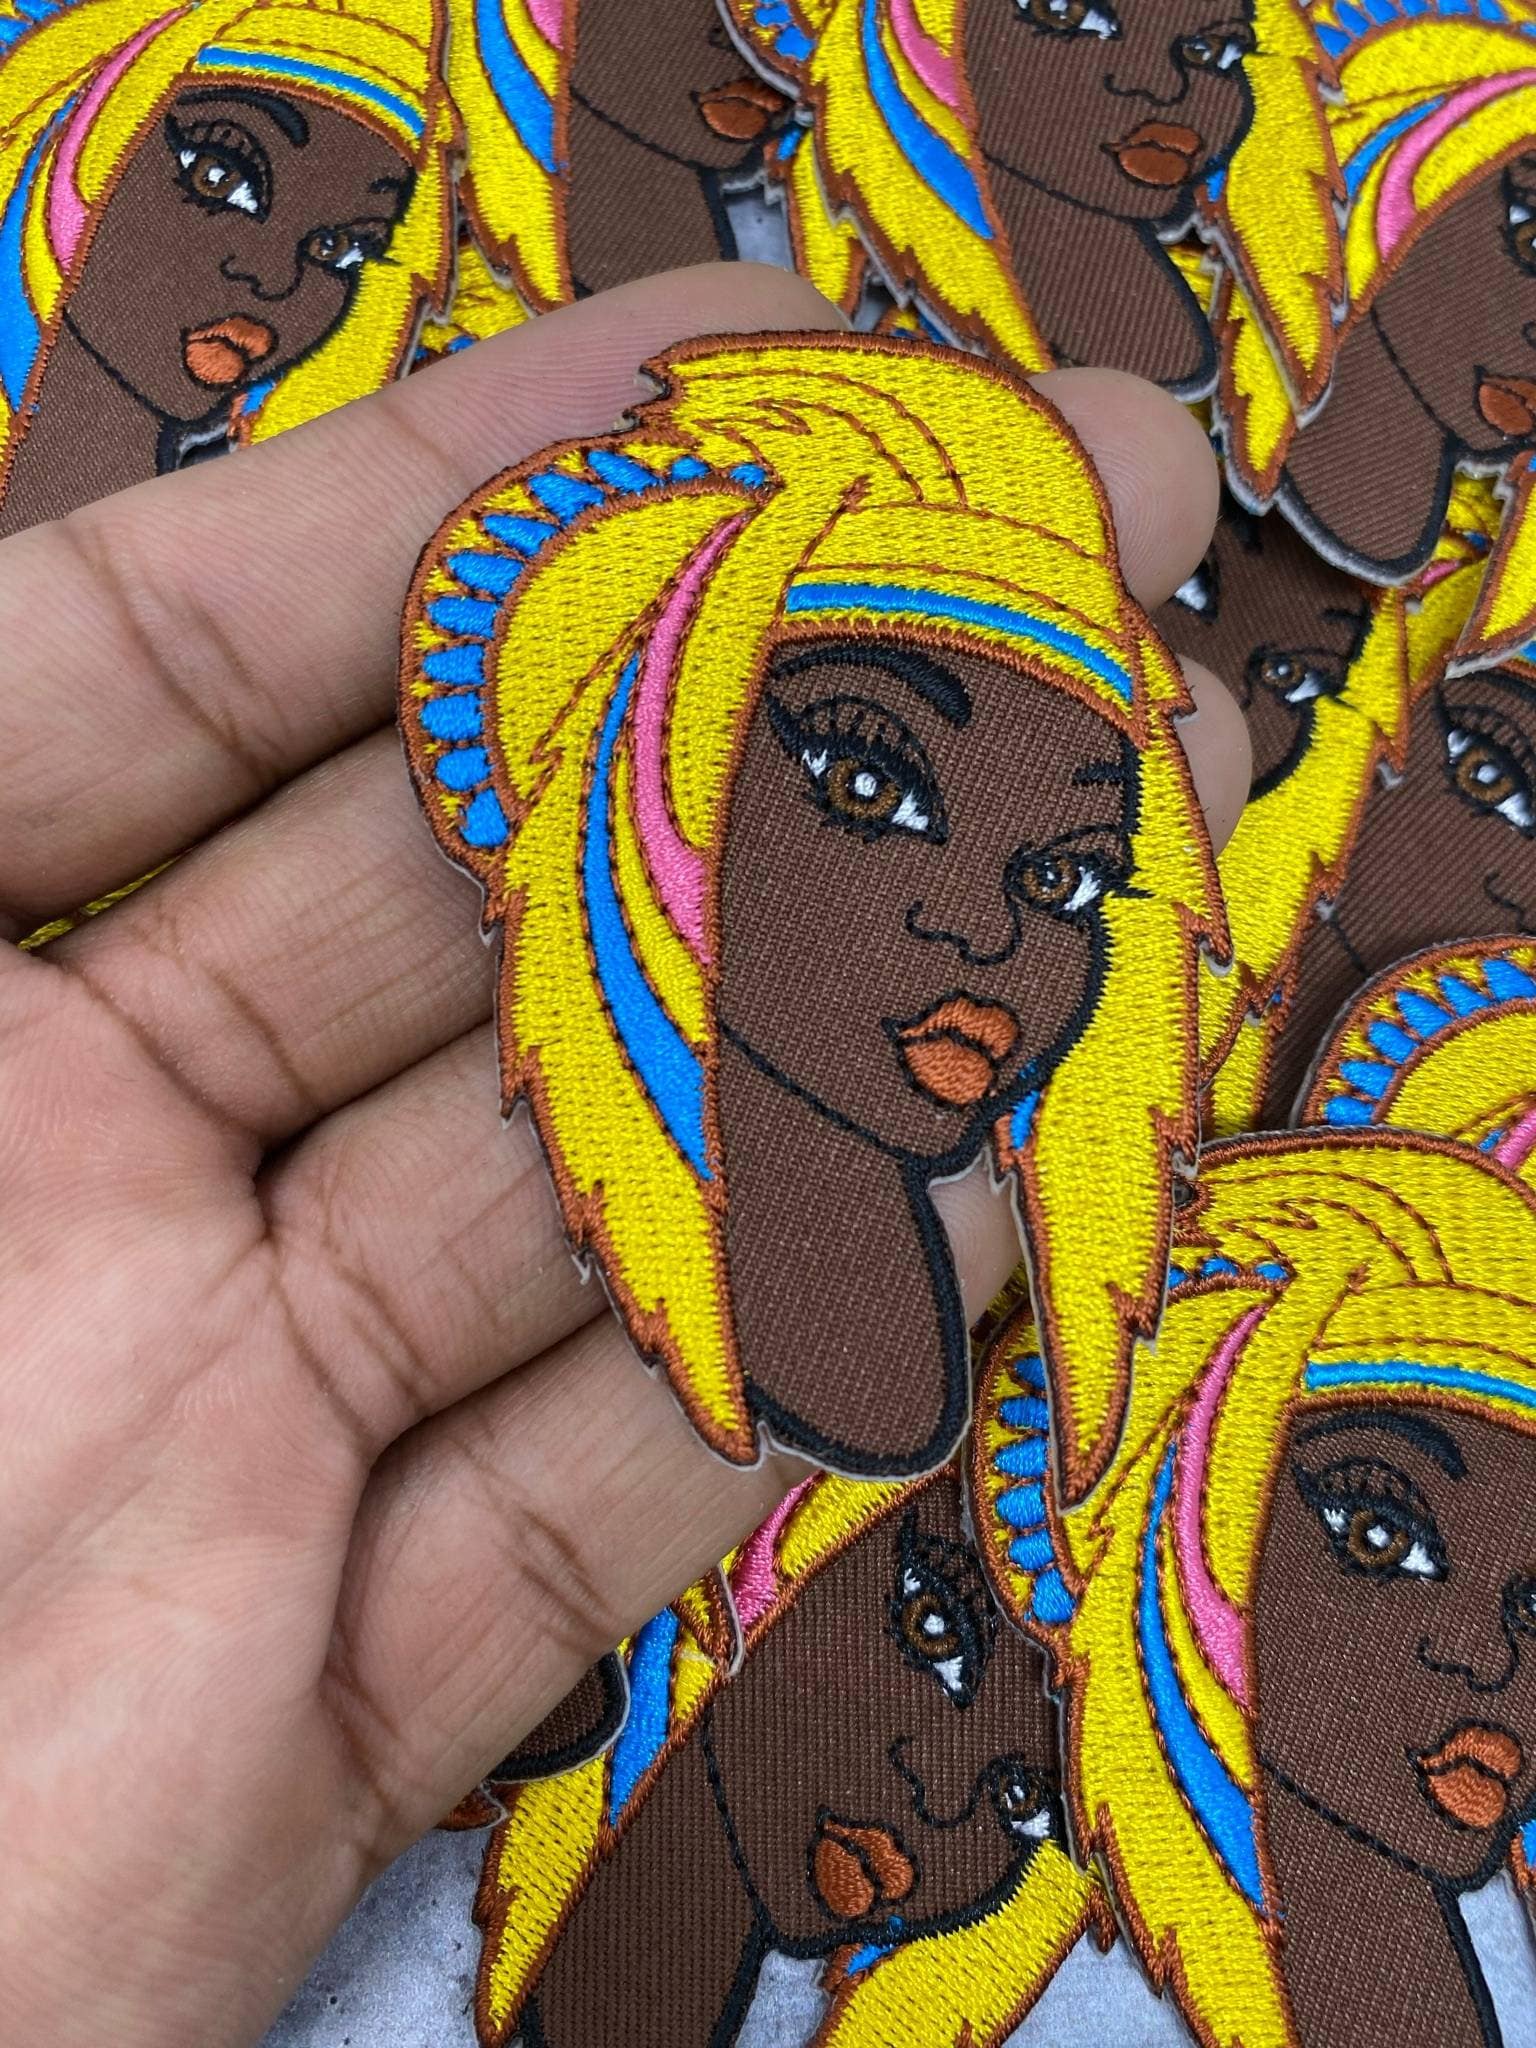 Cute, "Warrior Princess" With Head Gear, Yellow, Blue, Pink Hair, Size 3" iron-on; Black Girl Magic Patch, Small Patch for Crocs & Clothes